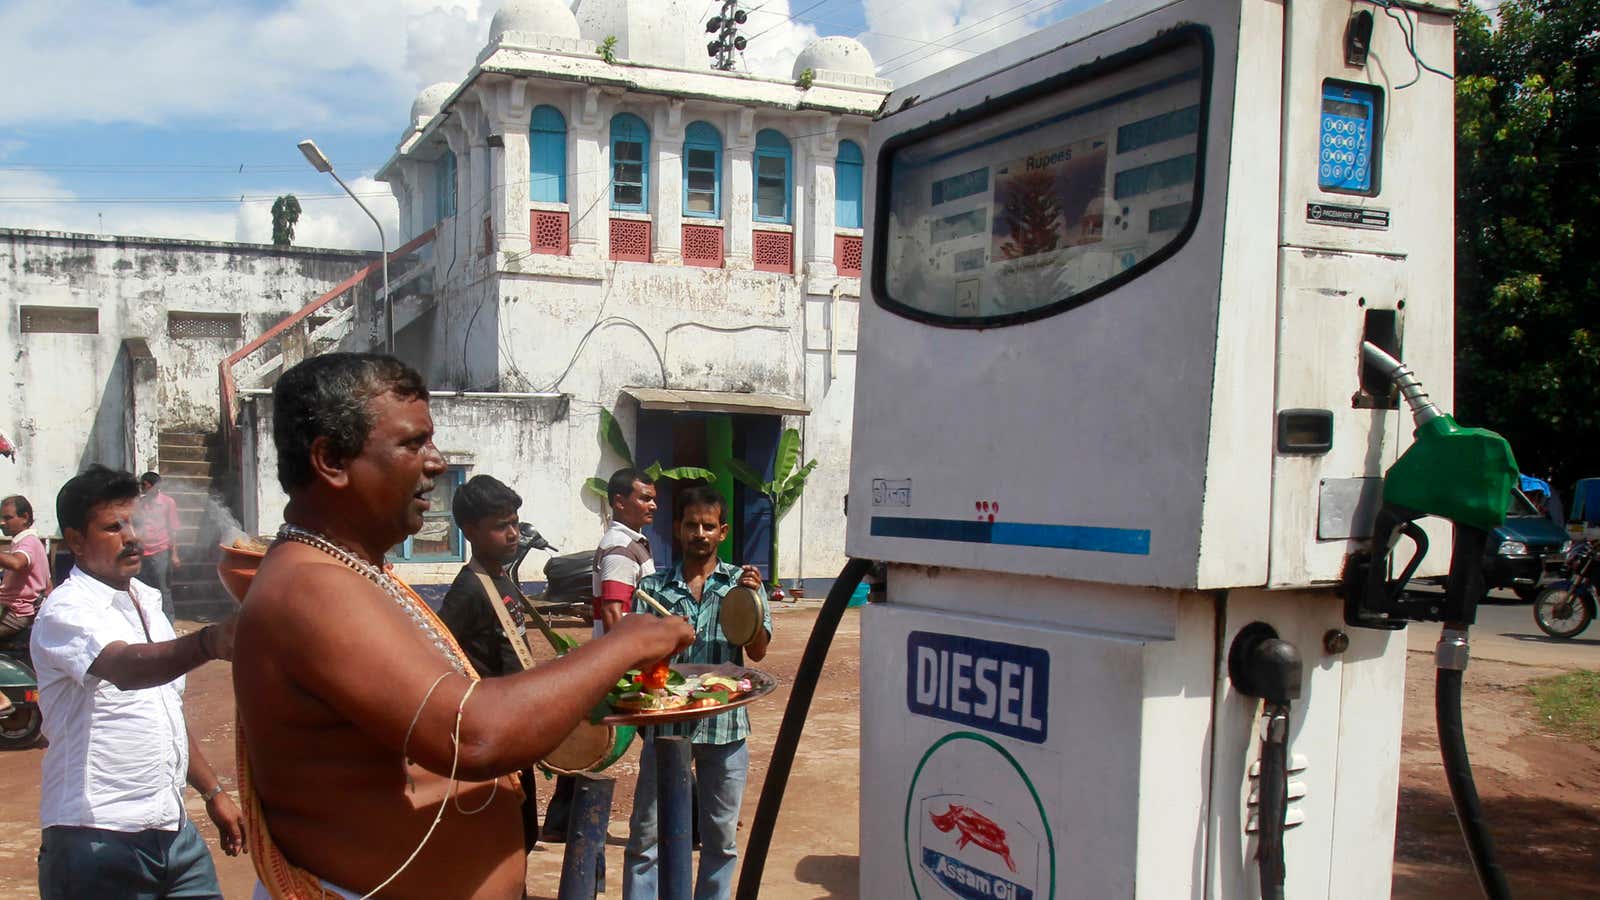 Indians will have to pray hard to keep fuel prices from rising.